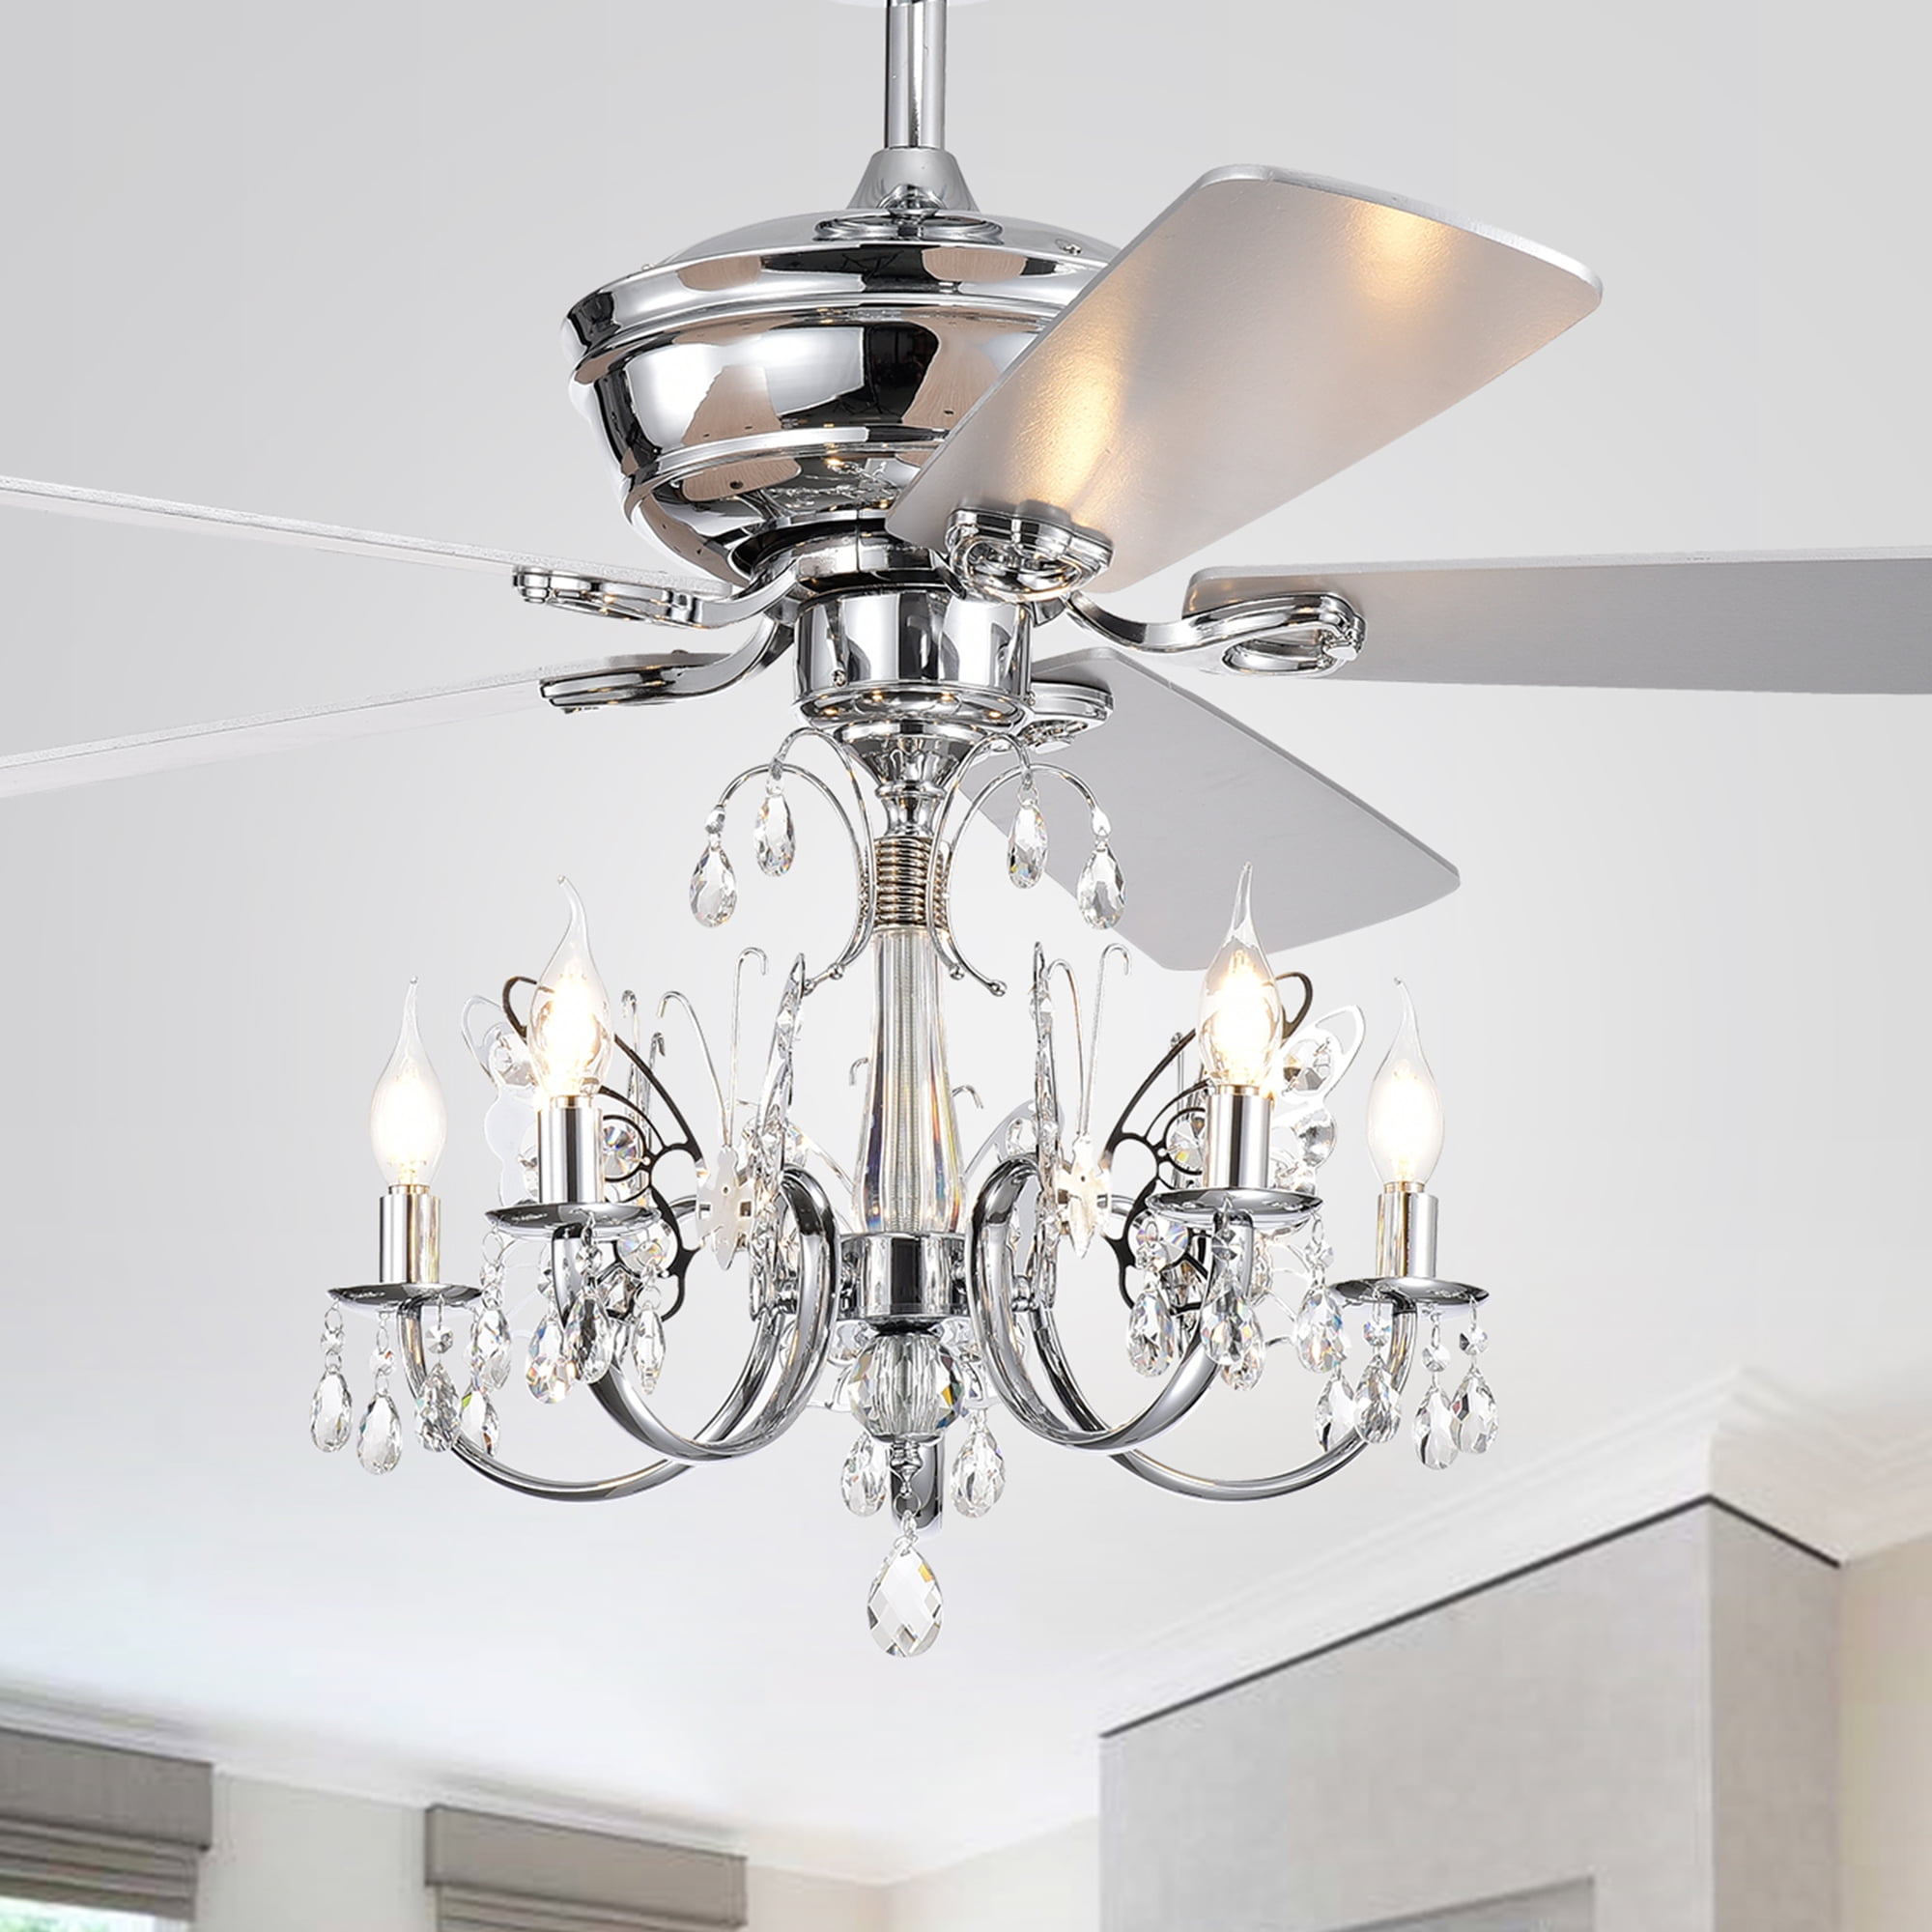 Silver Orchid Finlayson 52-inch 5-light Chrome Lighted Ceiling Fan with Reversible Blades